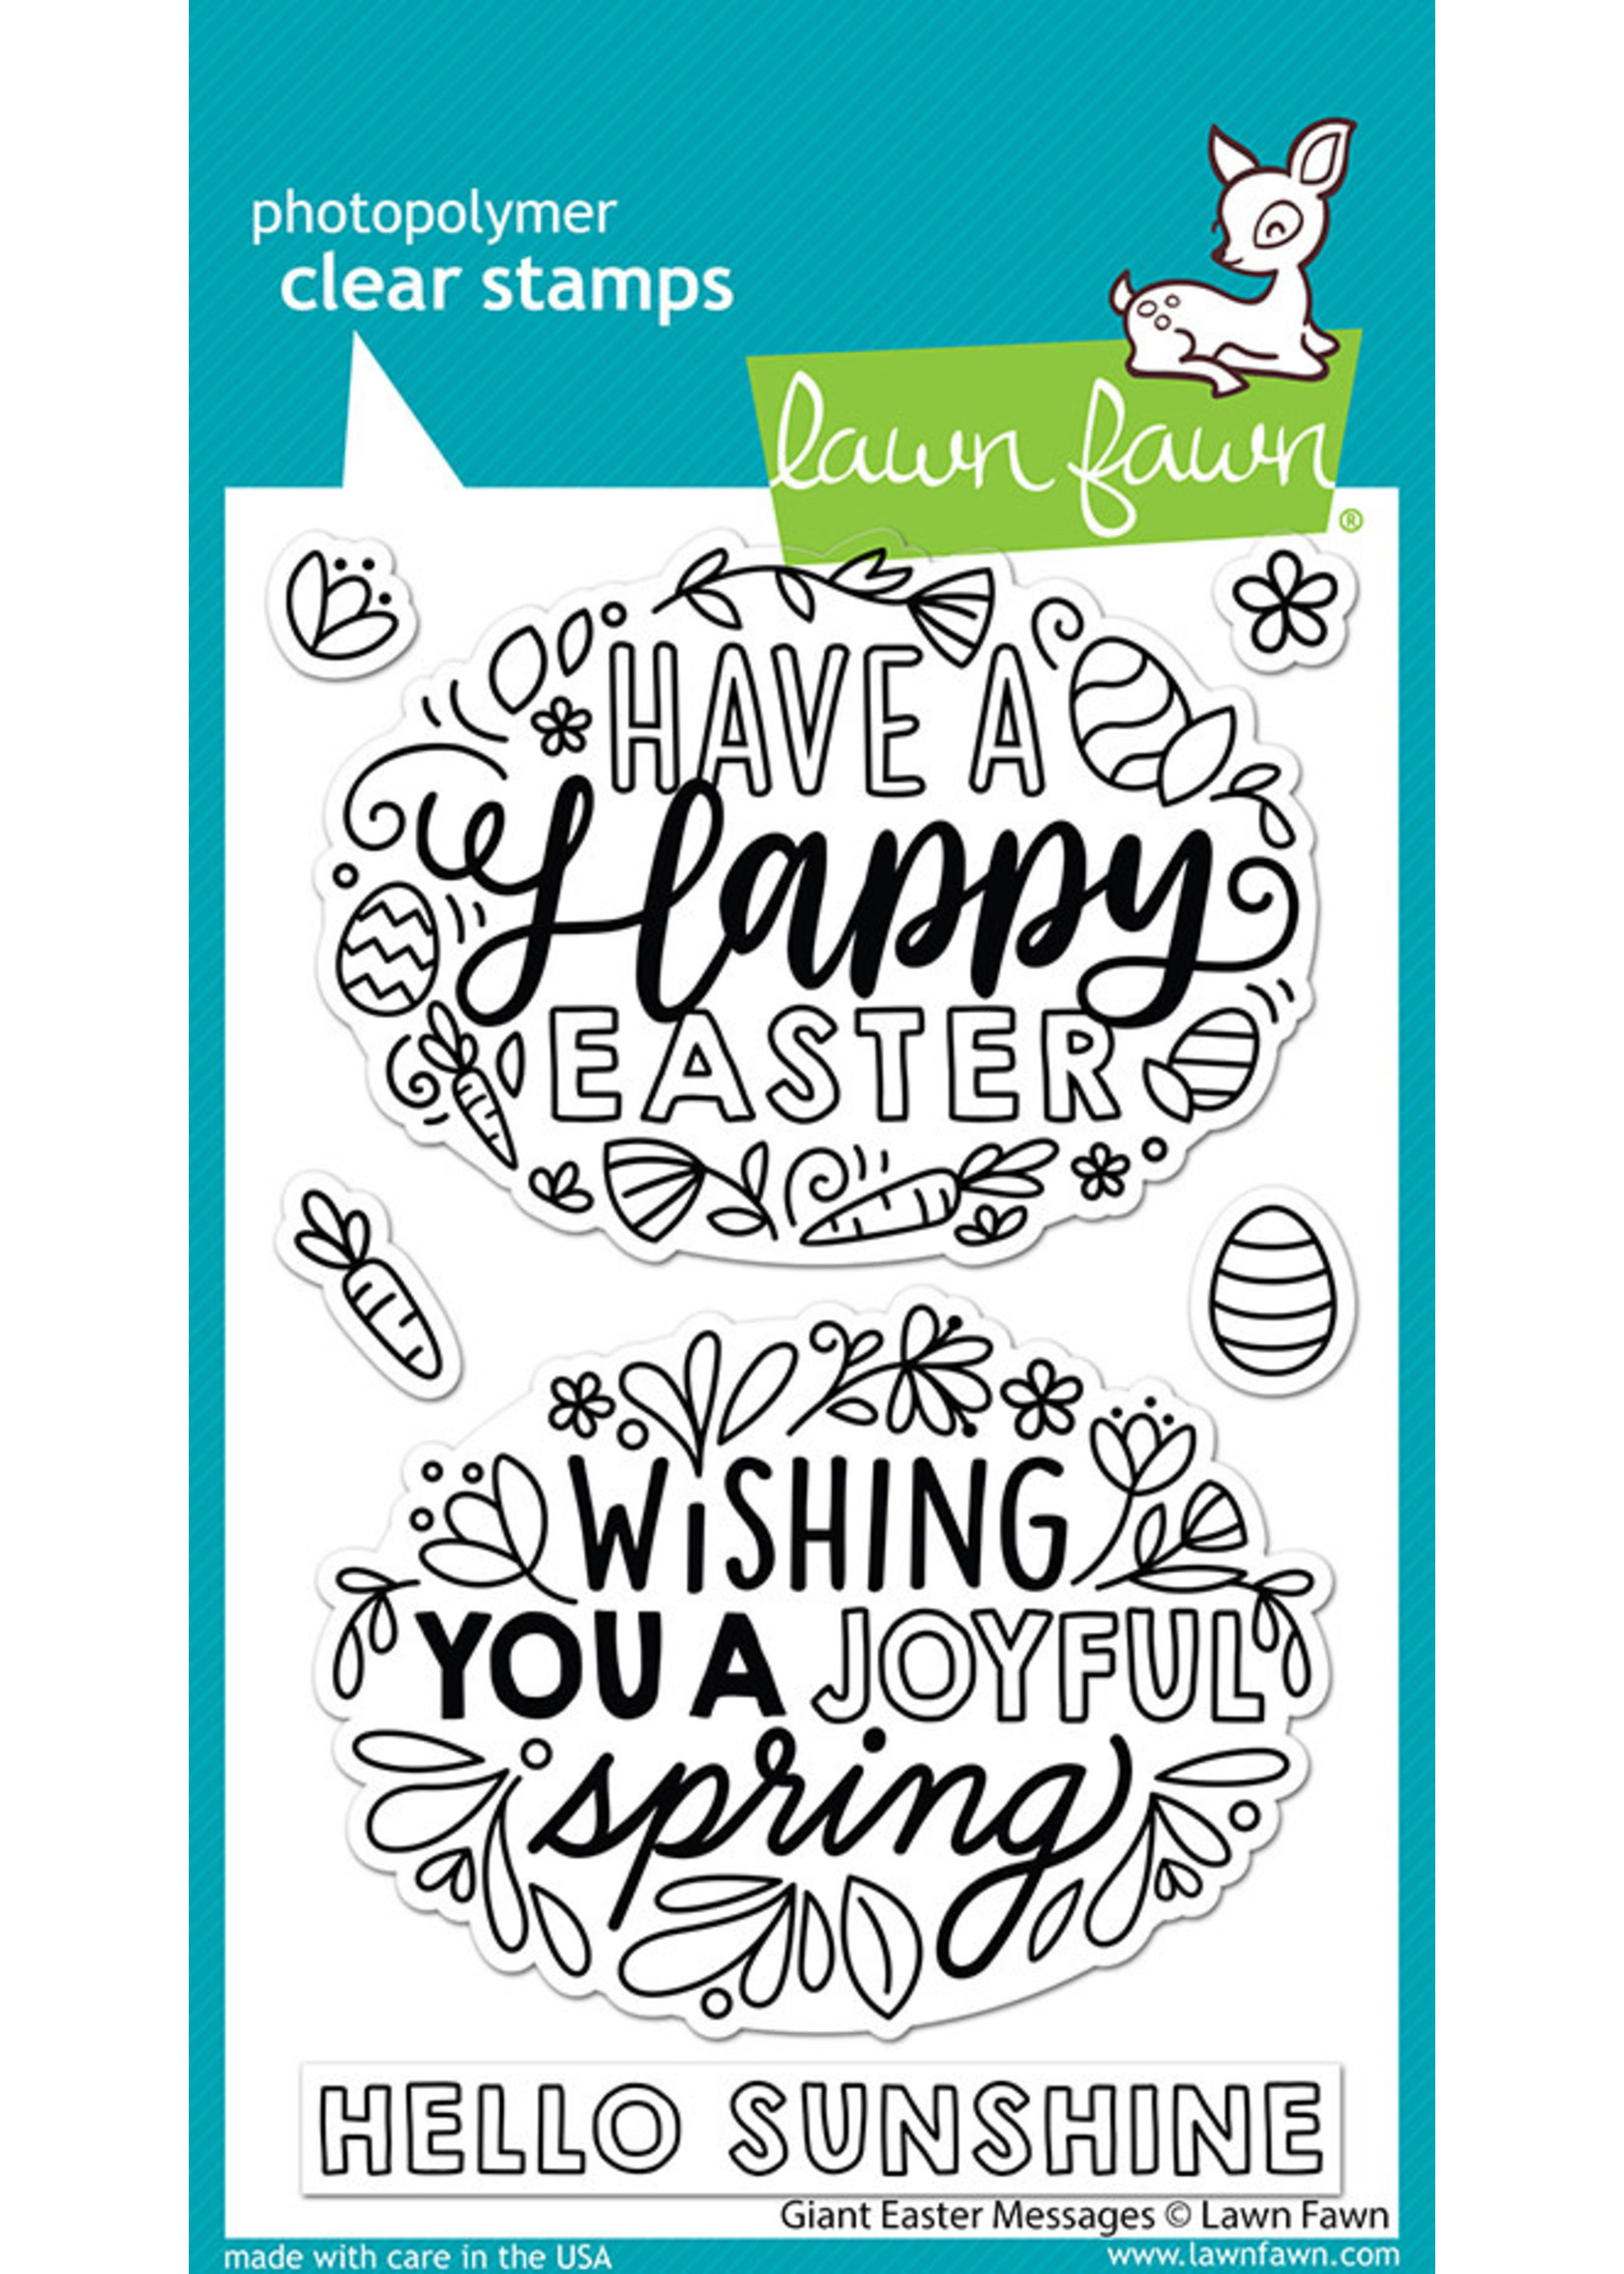 Lawn Fawn giant easter messages stamp